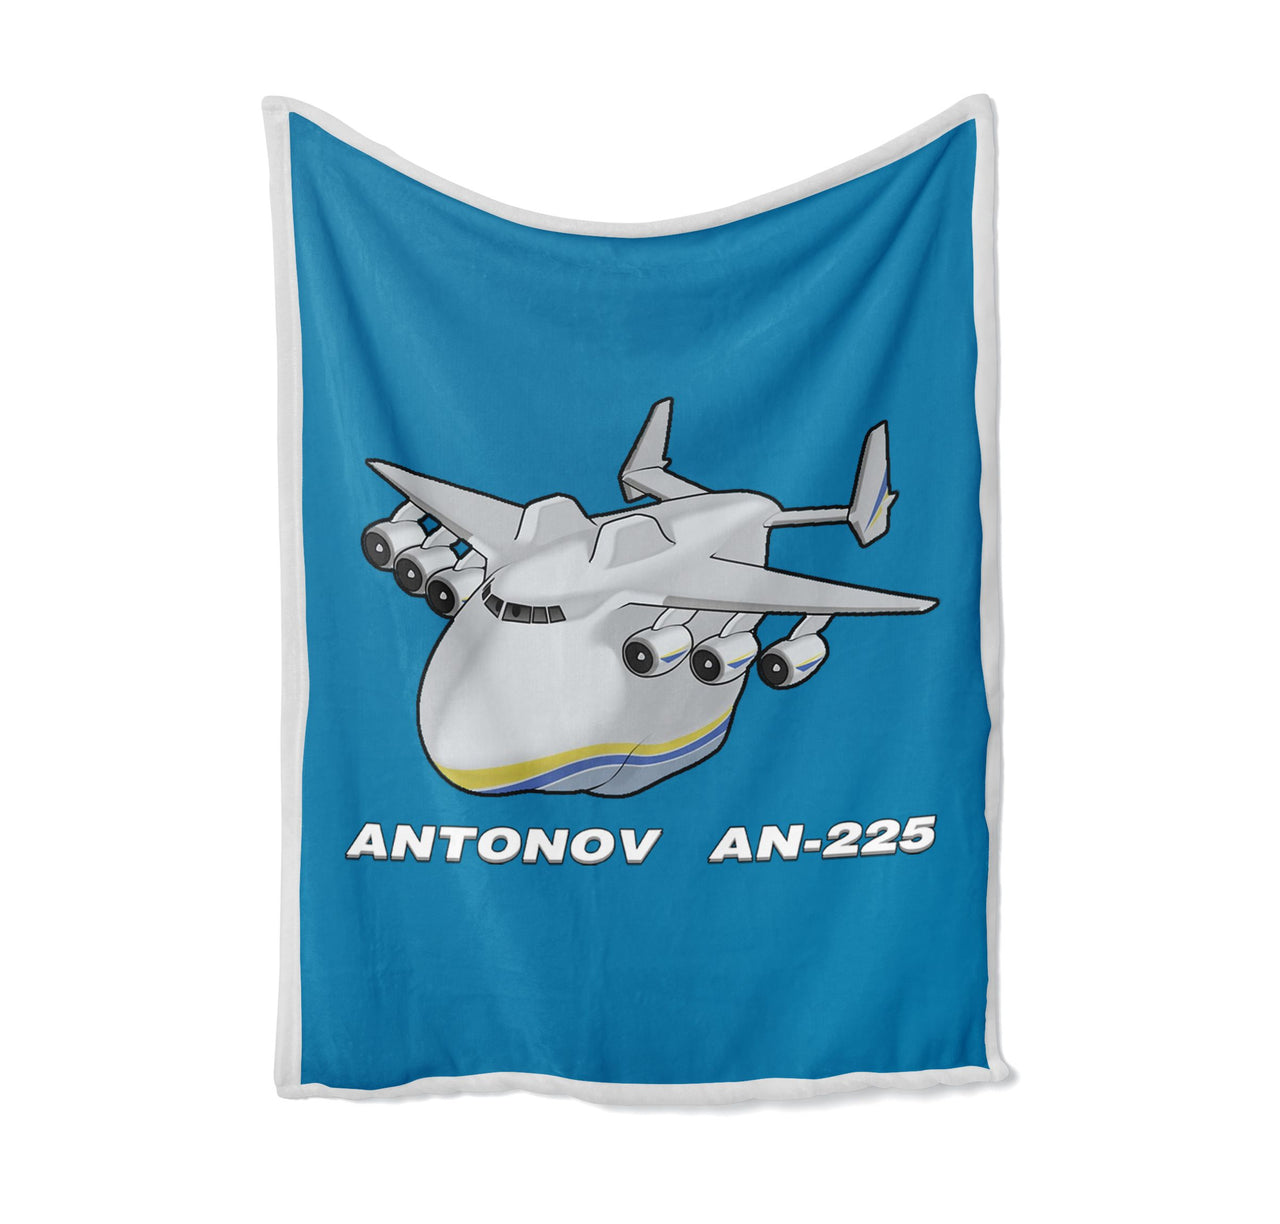 Antonov AN-225 (29) Designed Bed Blankets & Covers